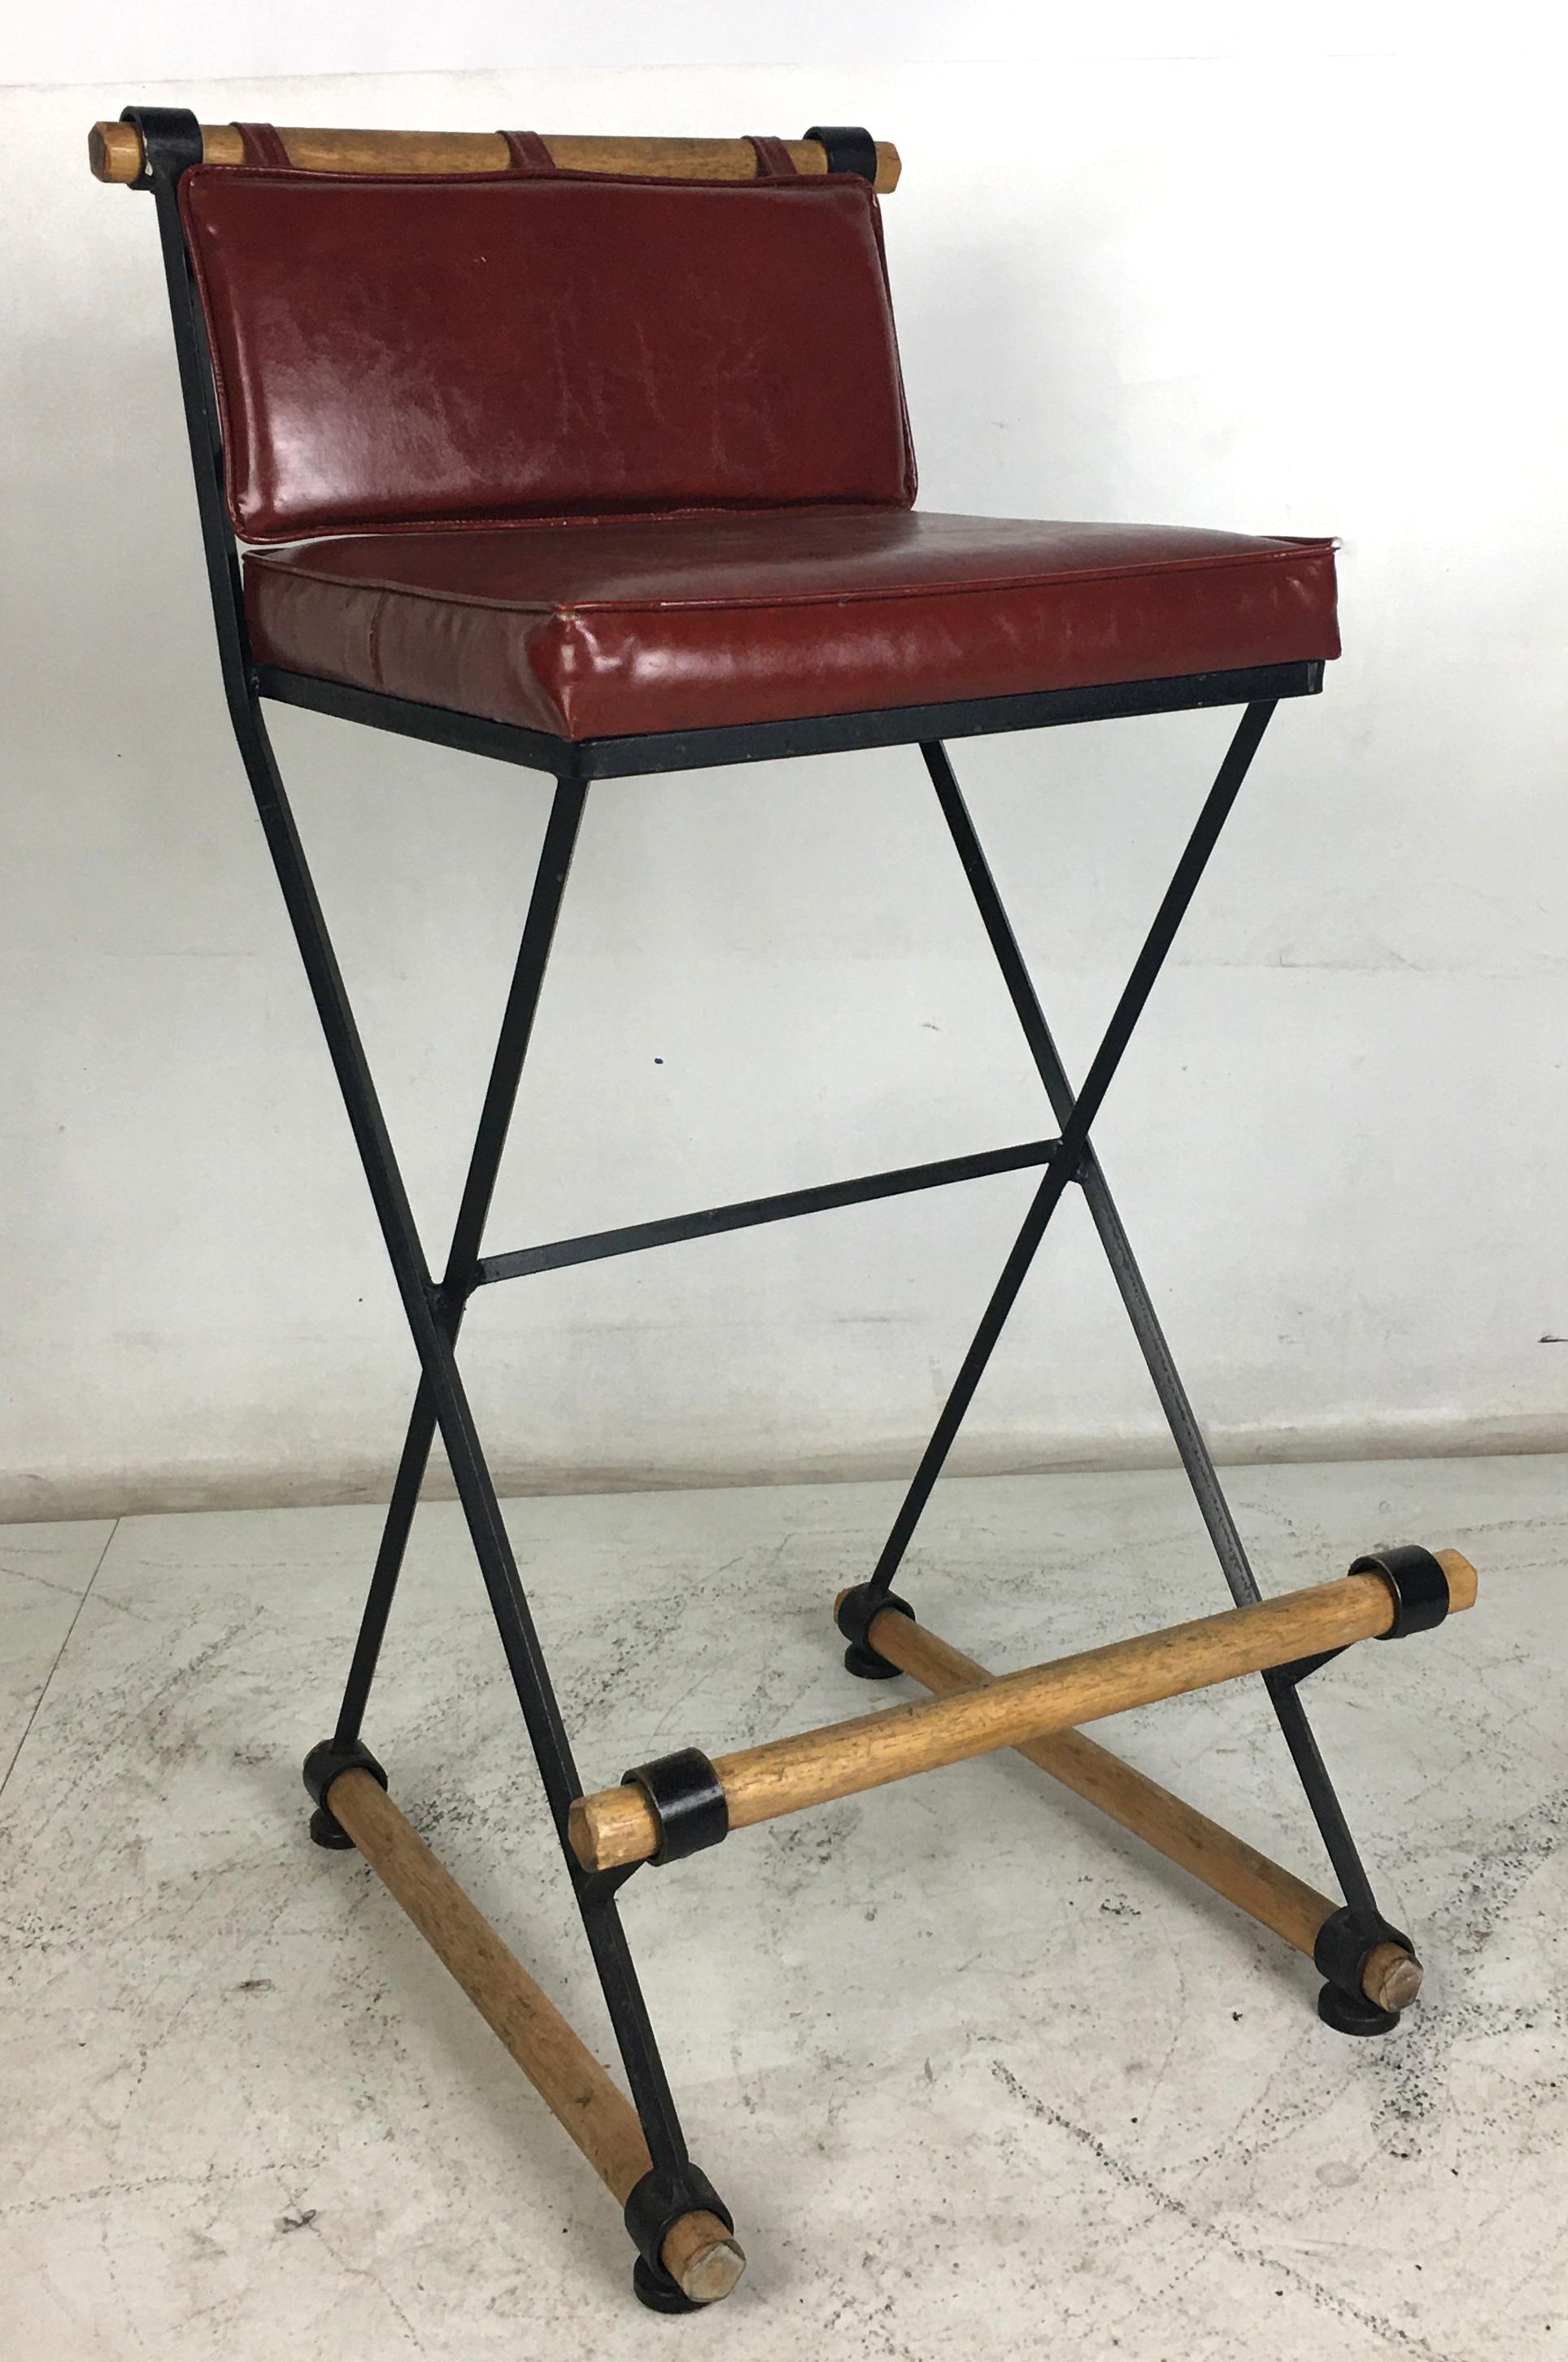 Rare set of Cleo Baldon bar stools with a short backrest and two-piece cushioning.  The seat design makes this model by far the most comfortable Baldon stools.  All of the wooden dowels have been refinished to original but the upholstery is worn and